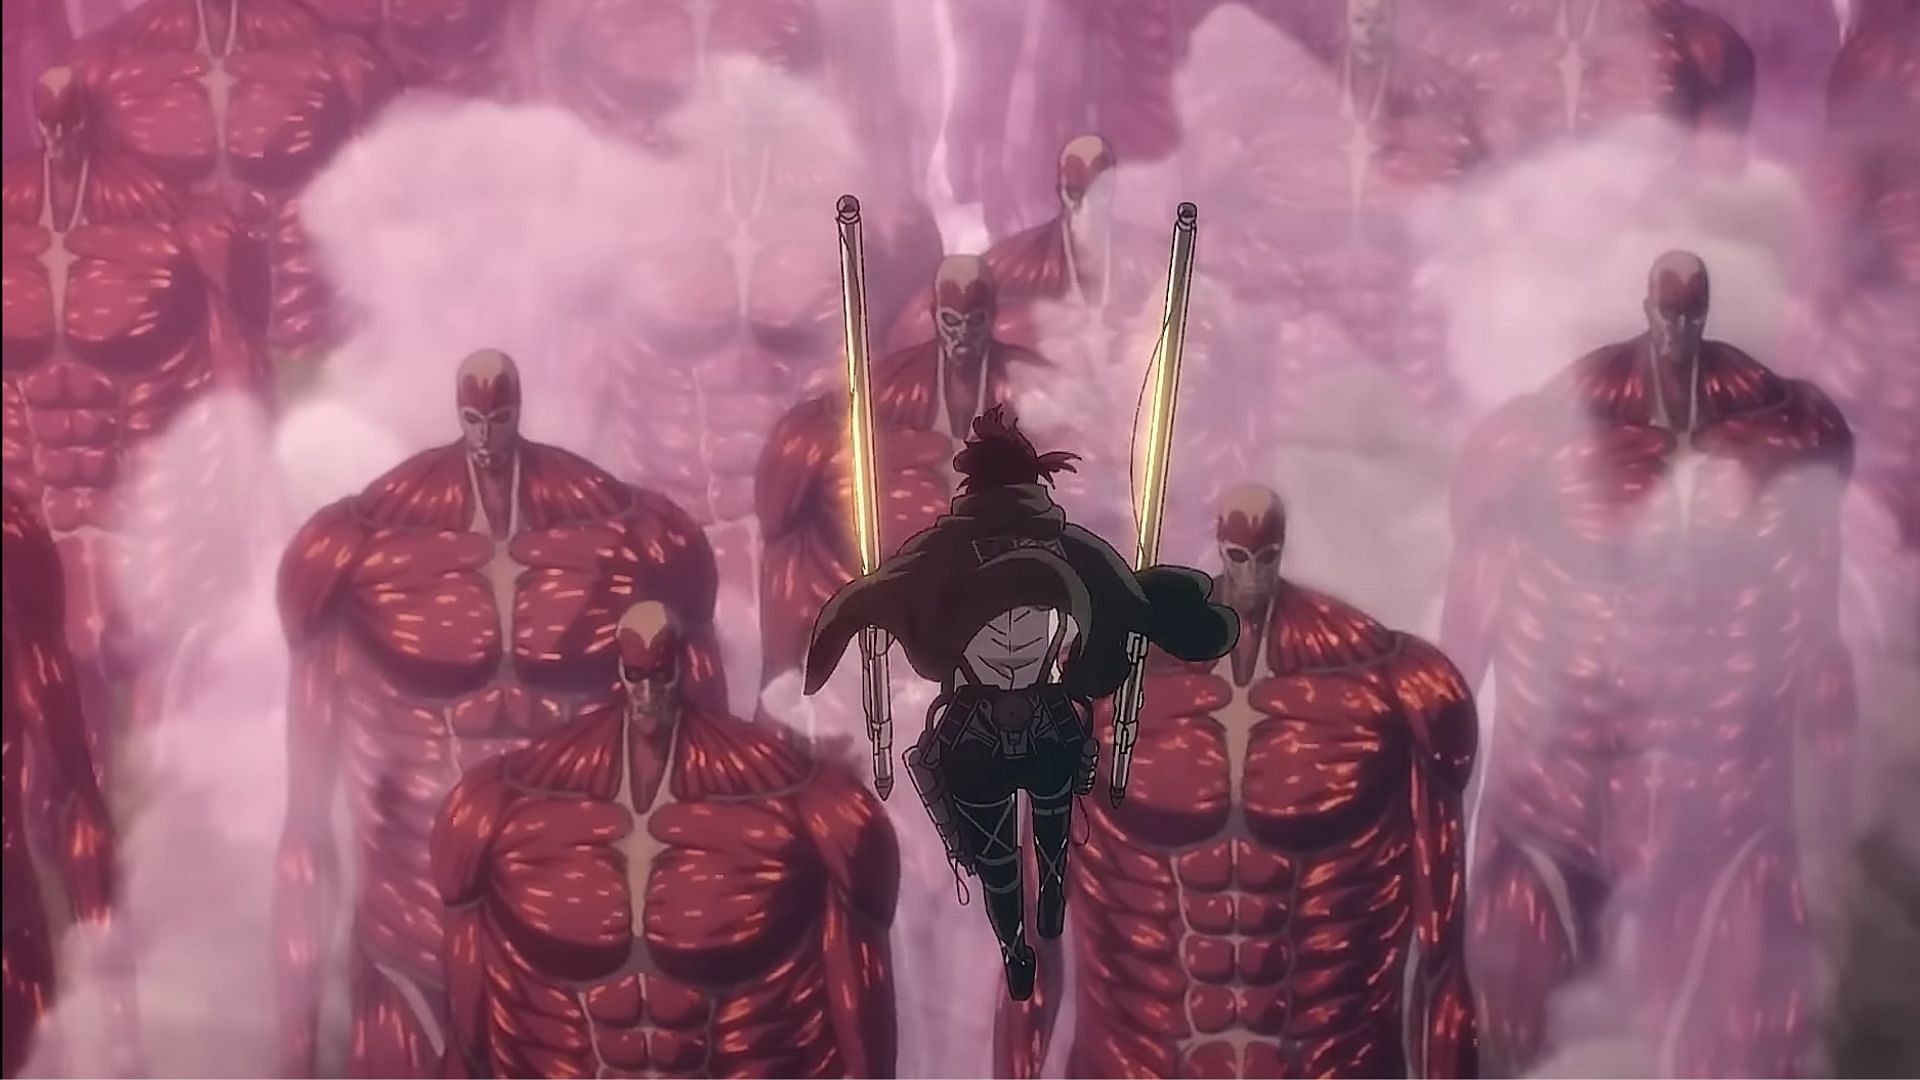 What is your review of the Attack On Titan season four trailer